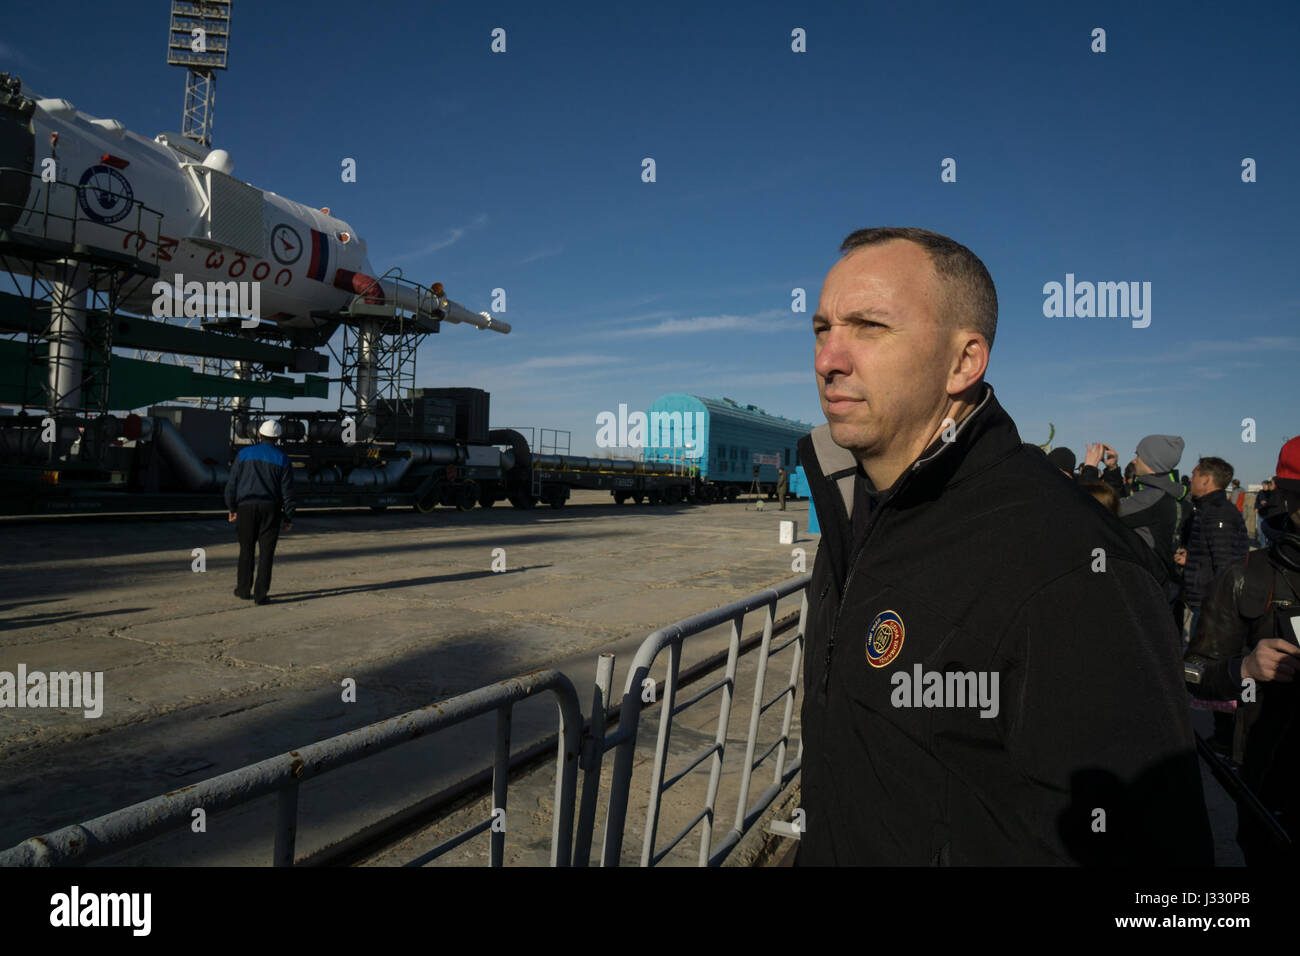 The Expedition 51 backup crew member, Randy Bresnik of NASA, watches as the Soyuz MS-04 spacecraft arrives at the launch pad by train on Monday, April 17, 2017 at the Baikonur Cosmodrome in Kazakhstan.  Launch of the Soyuz rocket is scheduled for April 20 Baikonur time and will send Expedition 51 prime crew, Soyuz Commander Fyodor Yurchikhin of Roscosmos and Flight Engineer Jack Fischer of NASA on a four and a half month mission aboard the International Space Station. Photo Credit: (NASA/Victor Zelentsov) Stock Photo